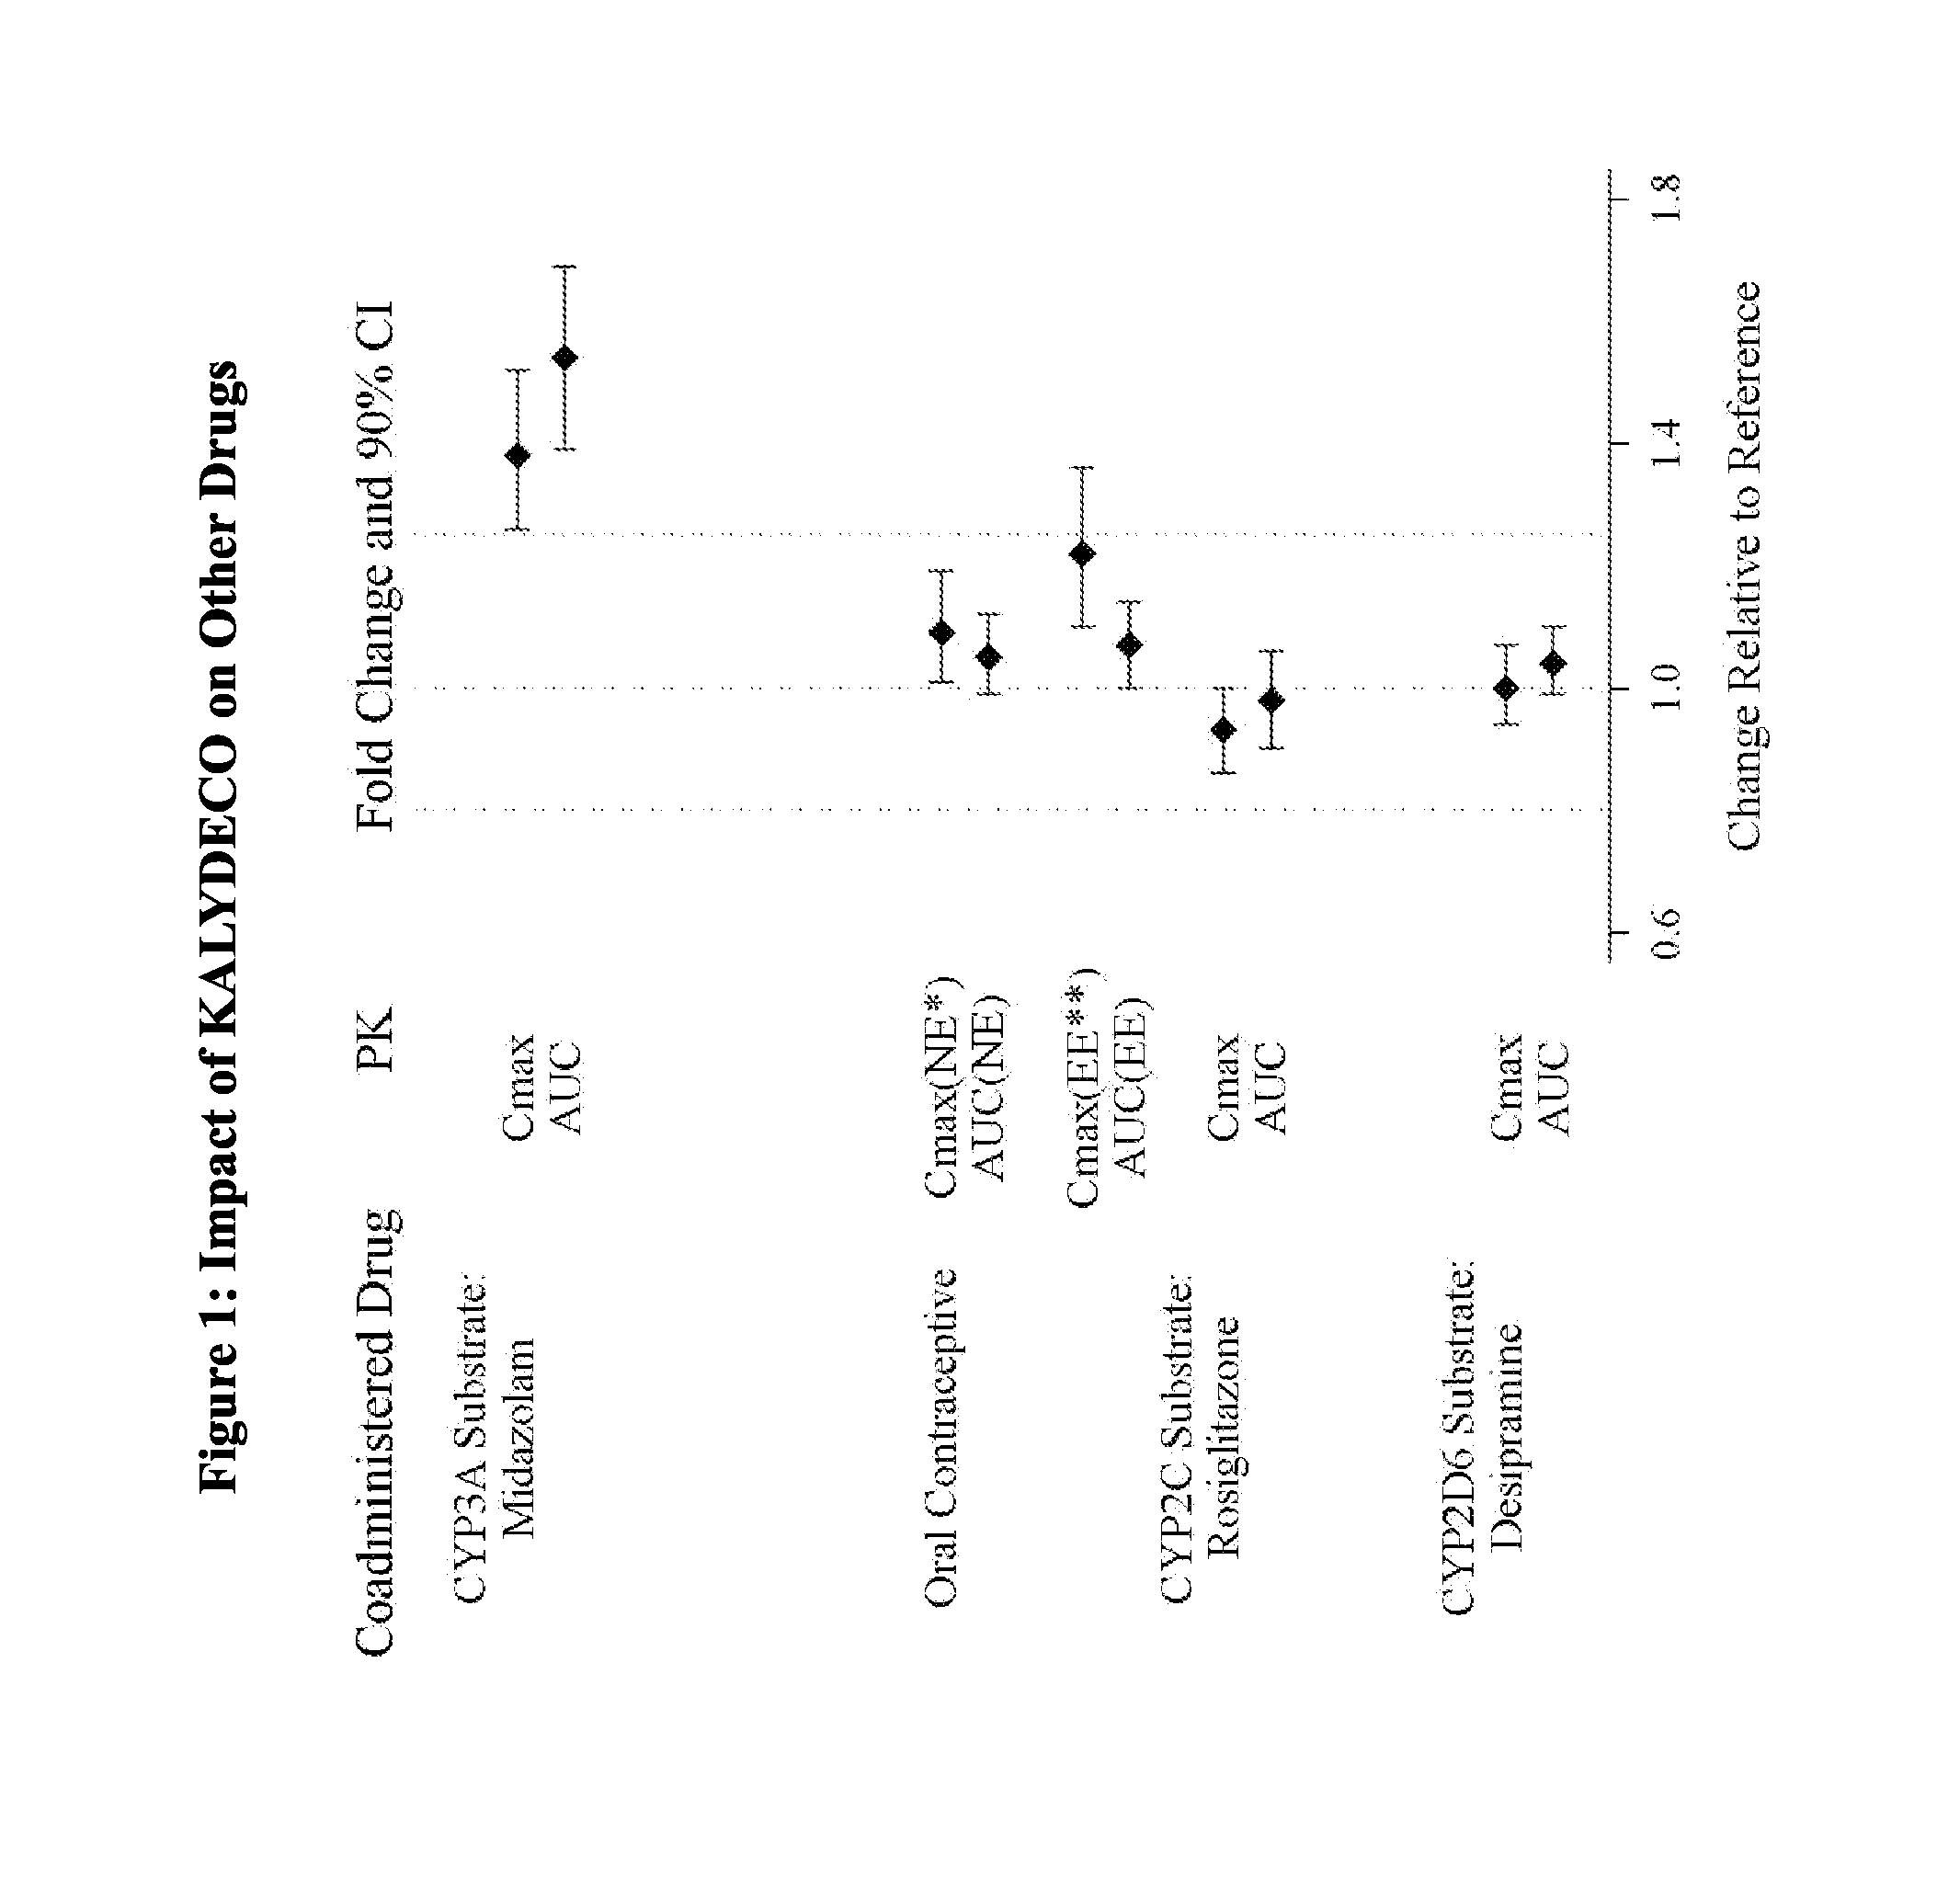 Pharmaceutical compositions for use in the treatment of cystic fibrosis